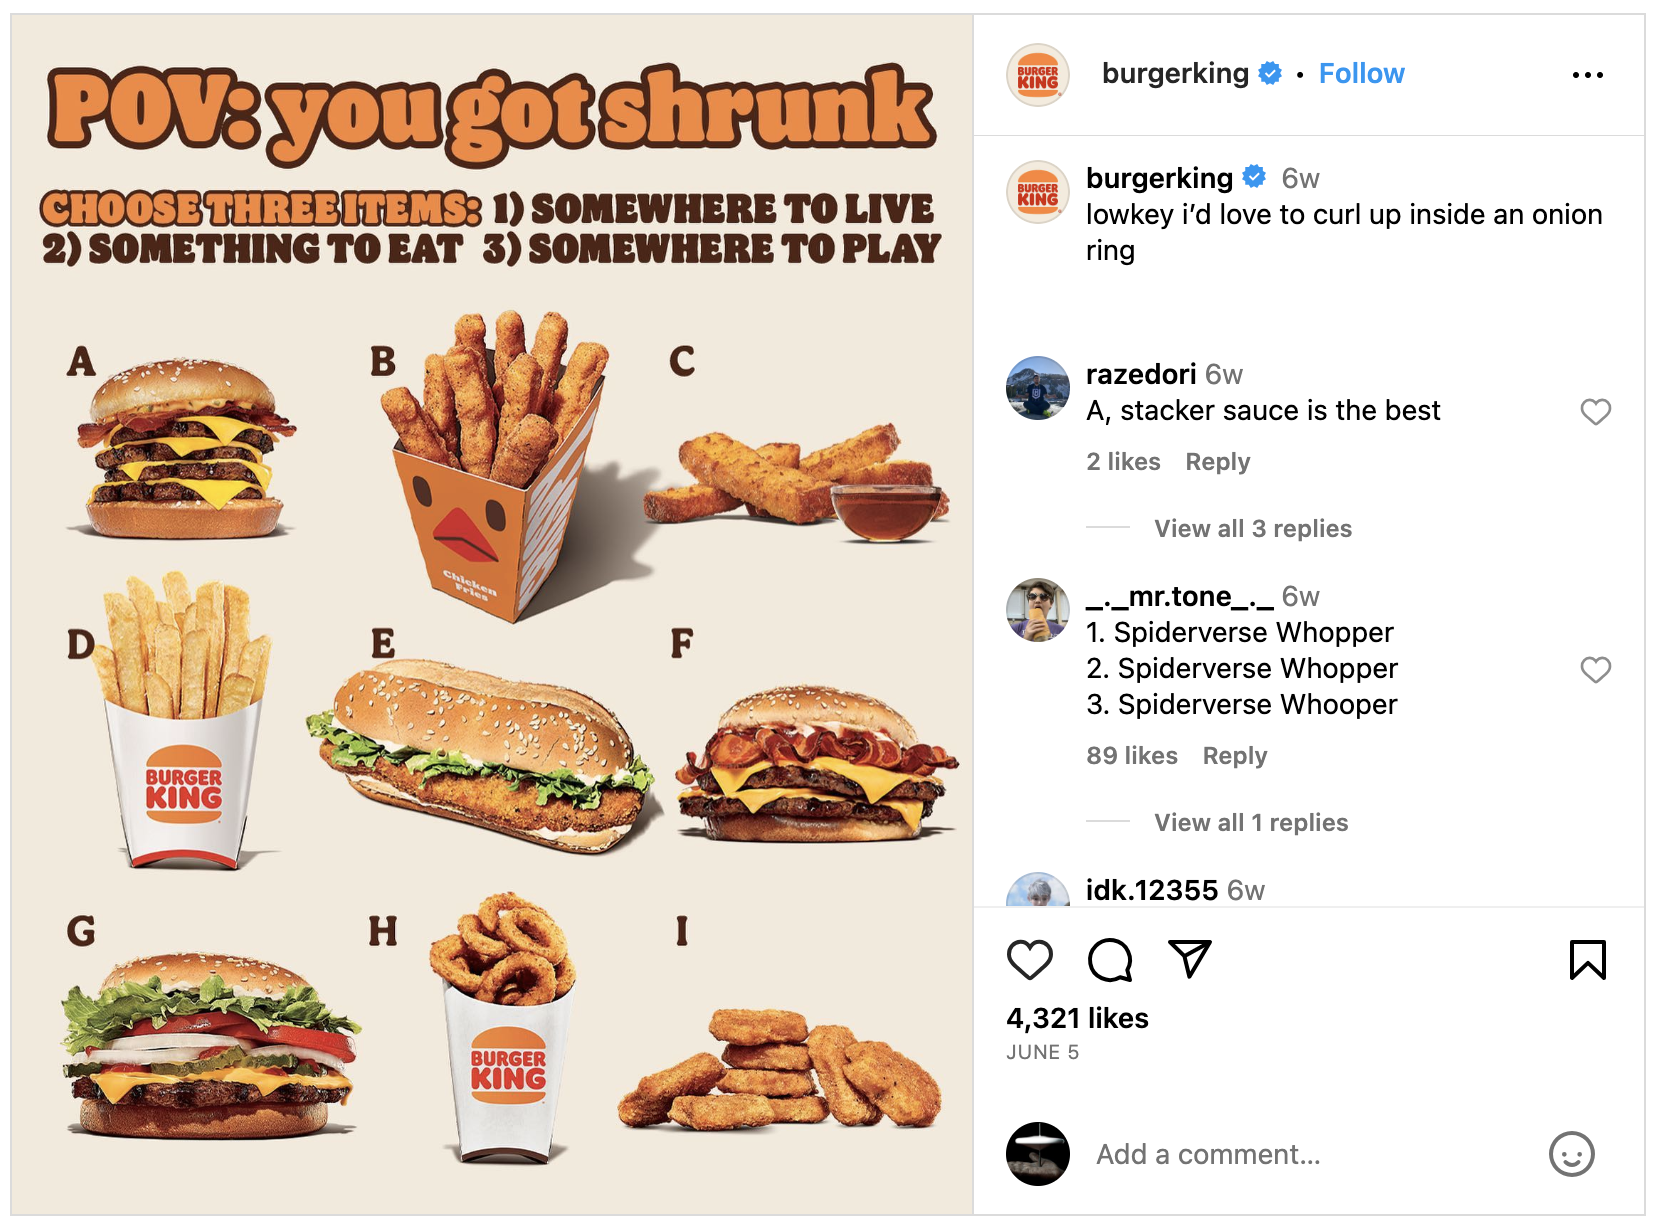 A Burger King Instagram post that's just as interactive as it is eye-catching.